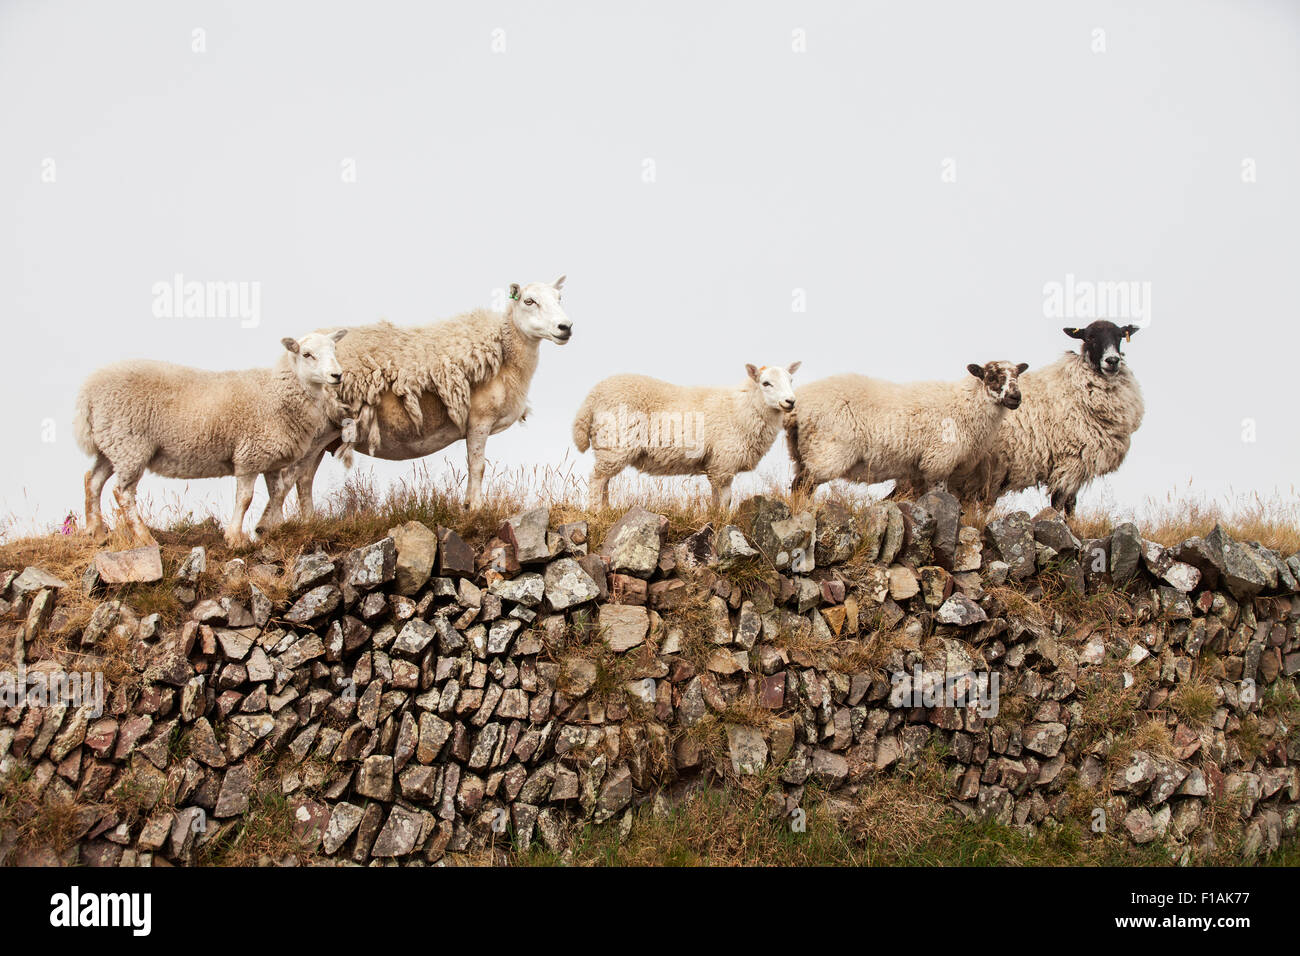 A group of sheep, Ovis aries, and lambs standing in a row on a dry stone wall viewpoint  in the english countryside on a dull grey spring day Stock Photo